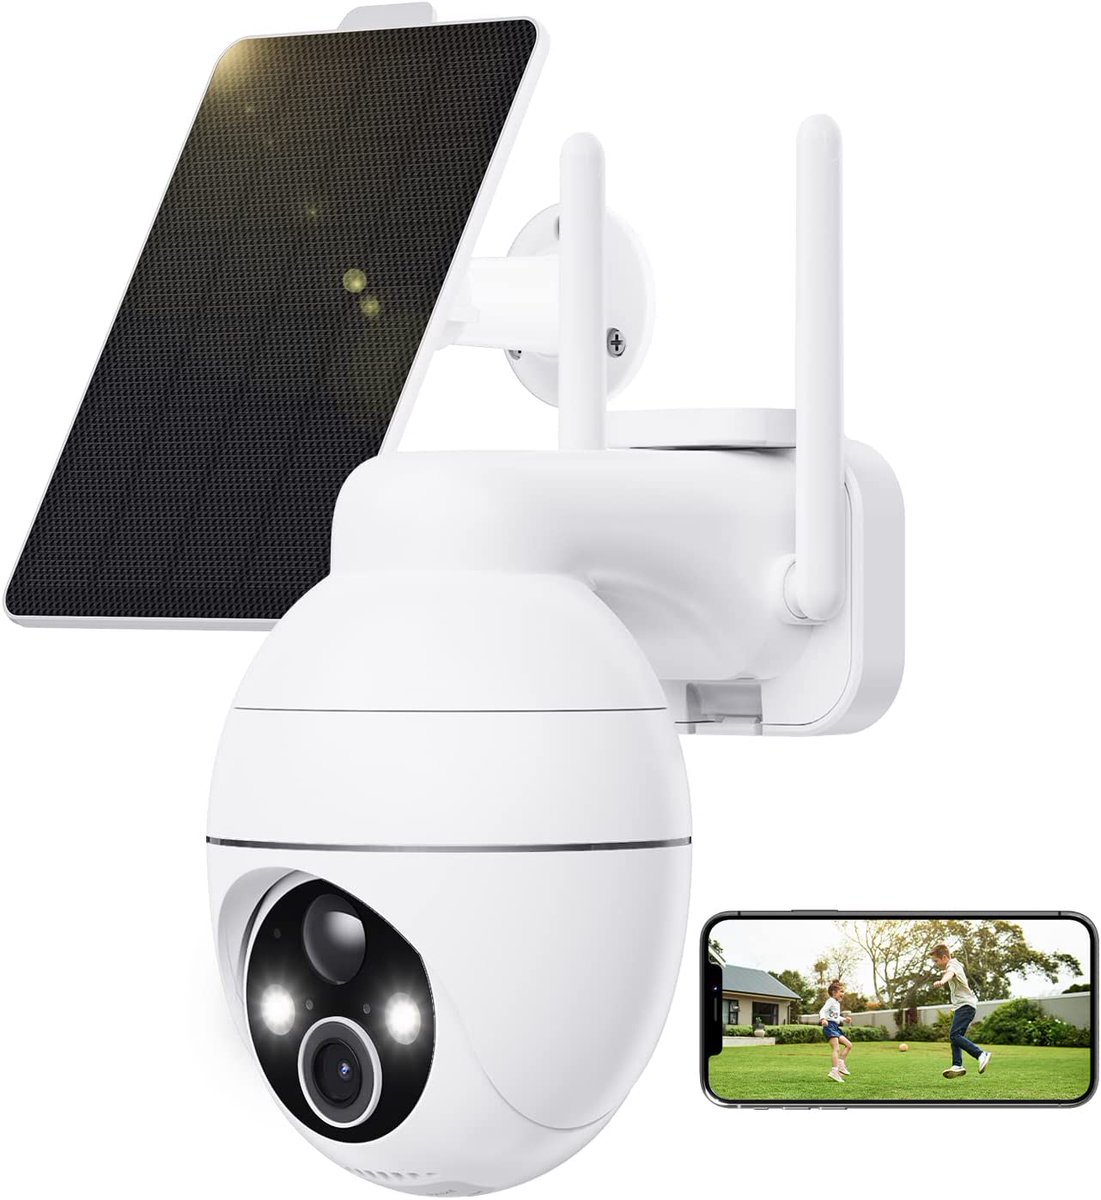 |Features/Details/Specifications| TKENPRO 2K Security Cameras Wireless Outdoor With Ultra HD Spotlight Color Night Vision #TKENPRO2KSecurityCameras #cameras #TKENPRO #2KSecurityCameras #SecurityCameras #SolarSecurityCamera pinterest.com/pin/5956714882…